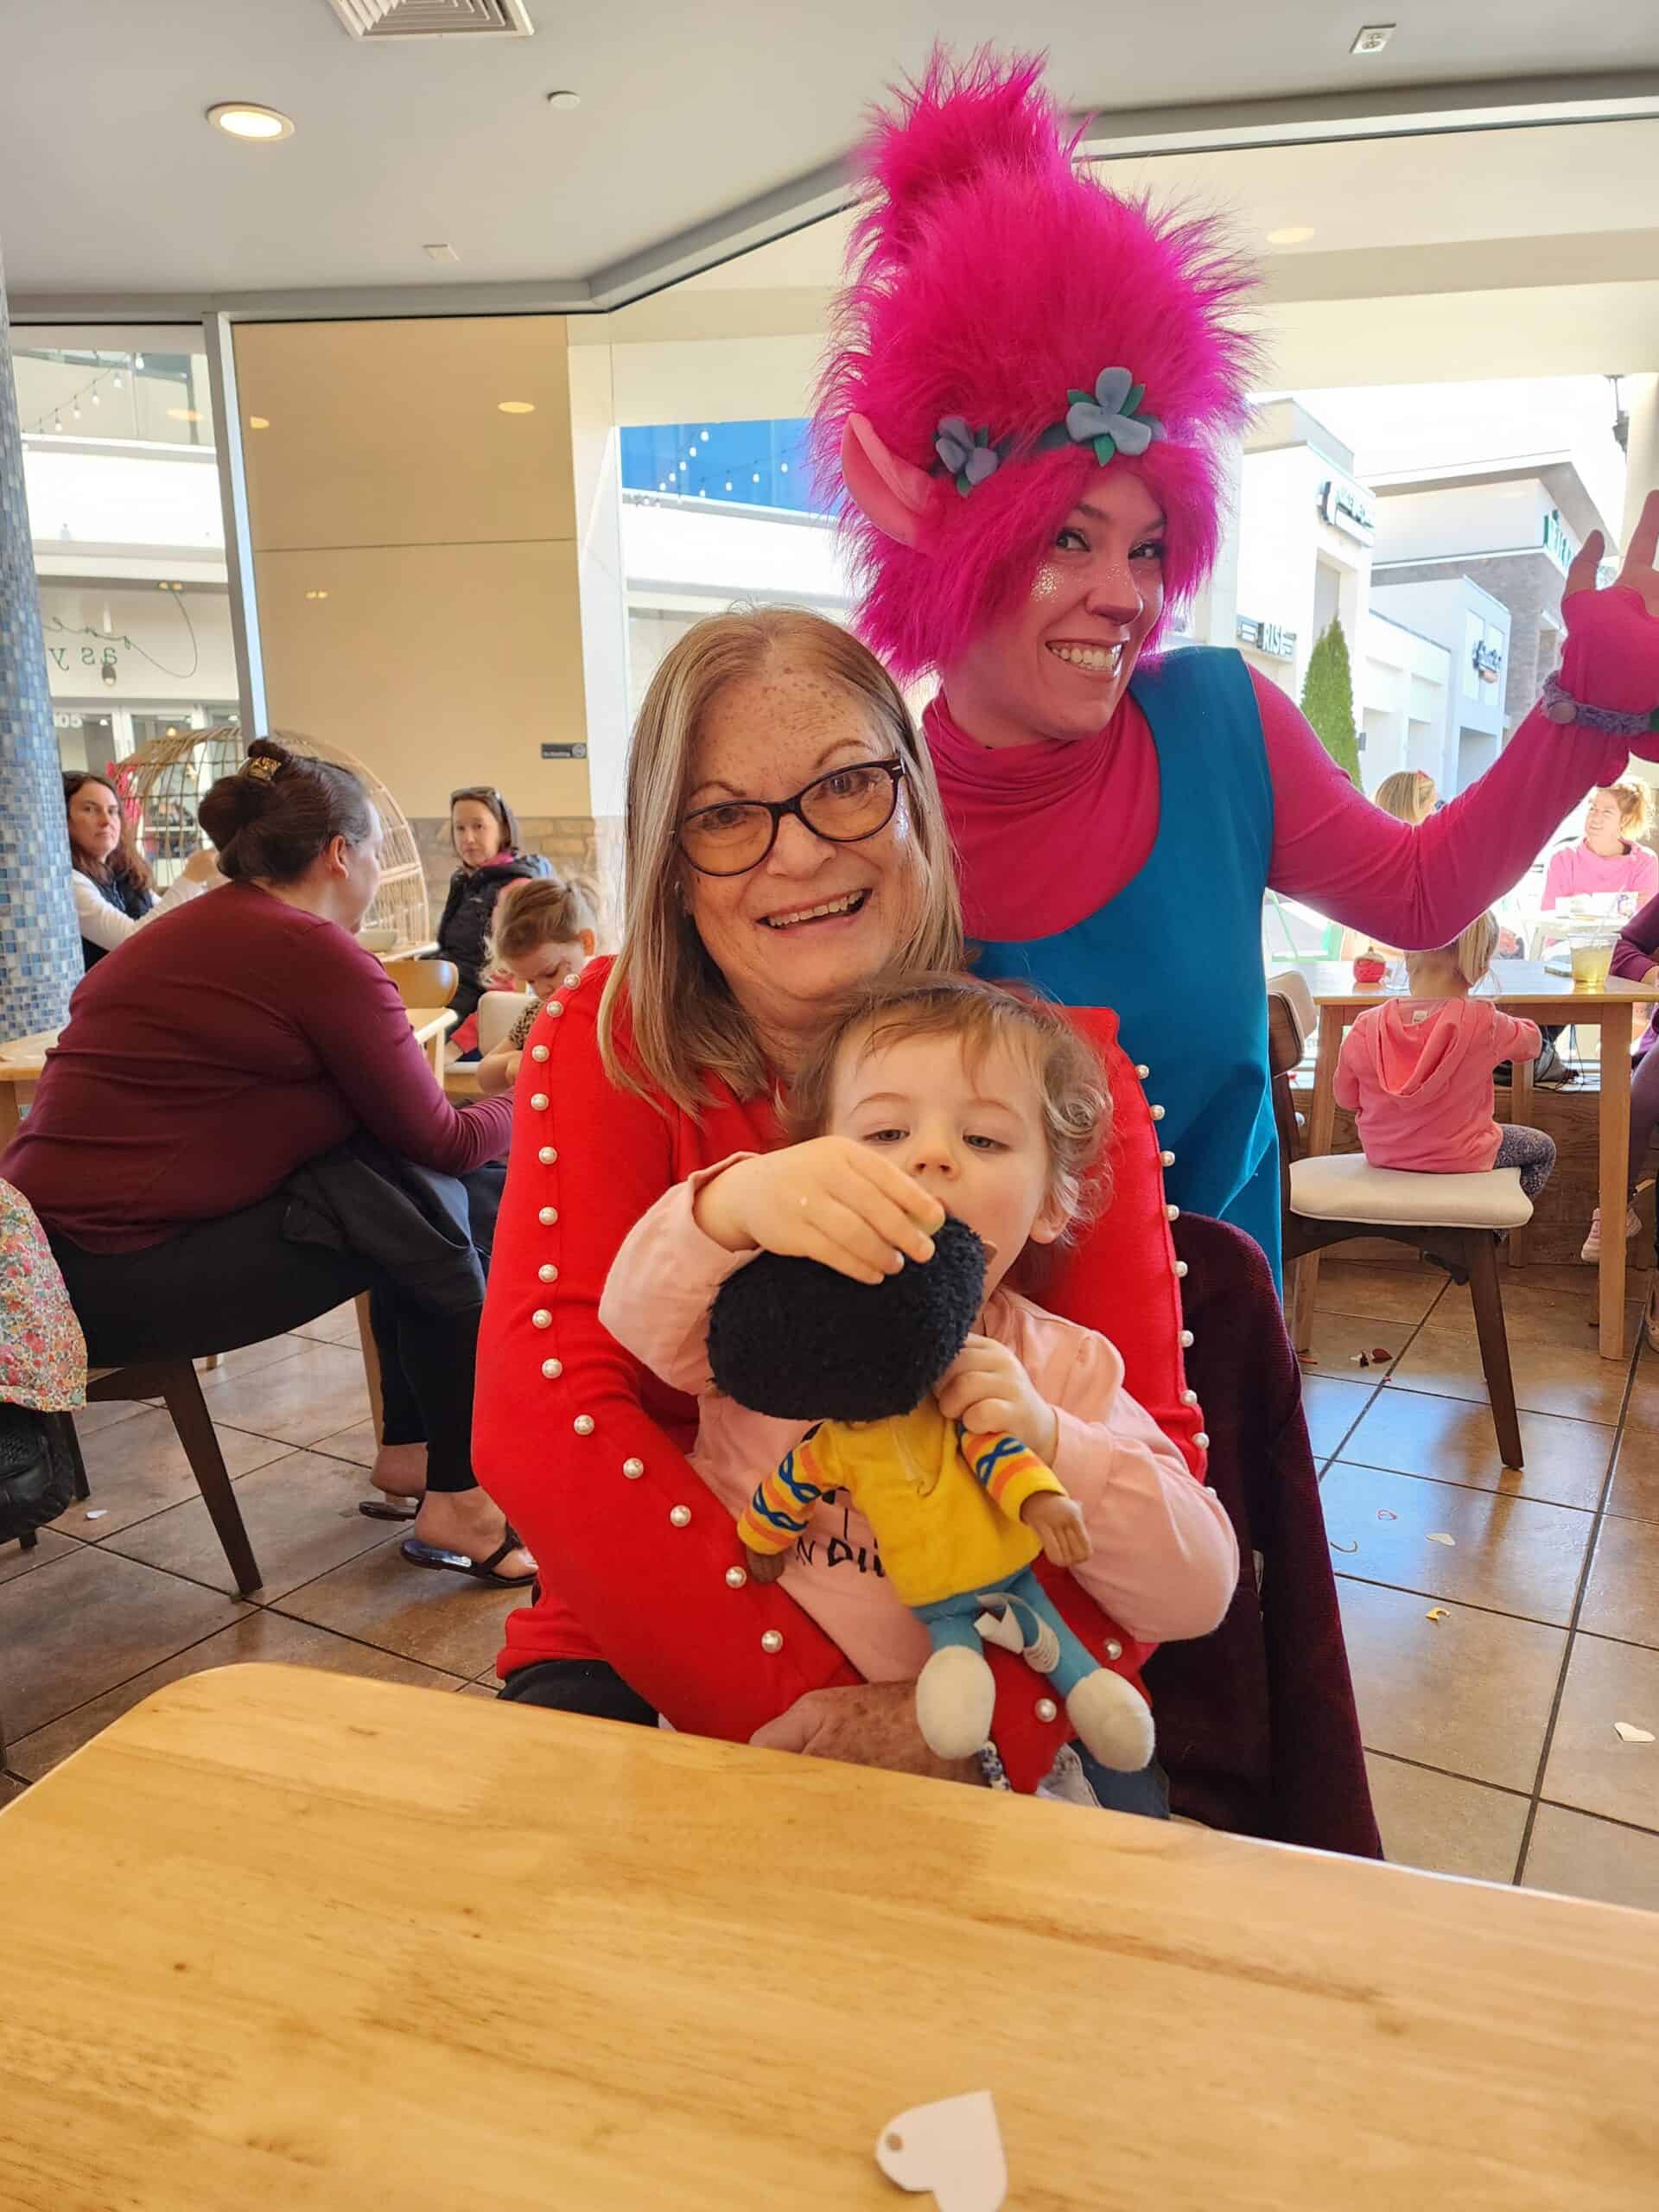 A joyful multi-generational family moment at a toddler activity in Cary, NC, with a senior woman smiling at the camera, a child engaging with a toy, and a vibrant character with pink hair and costume spreading cheer.